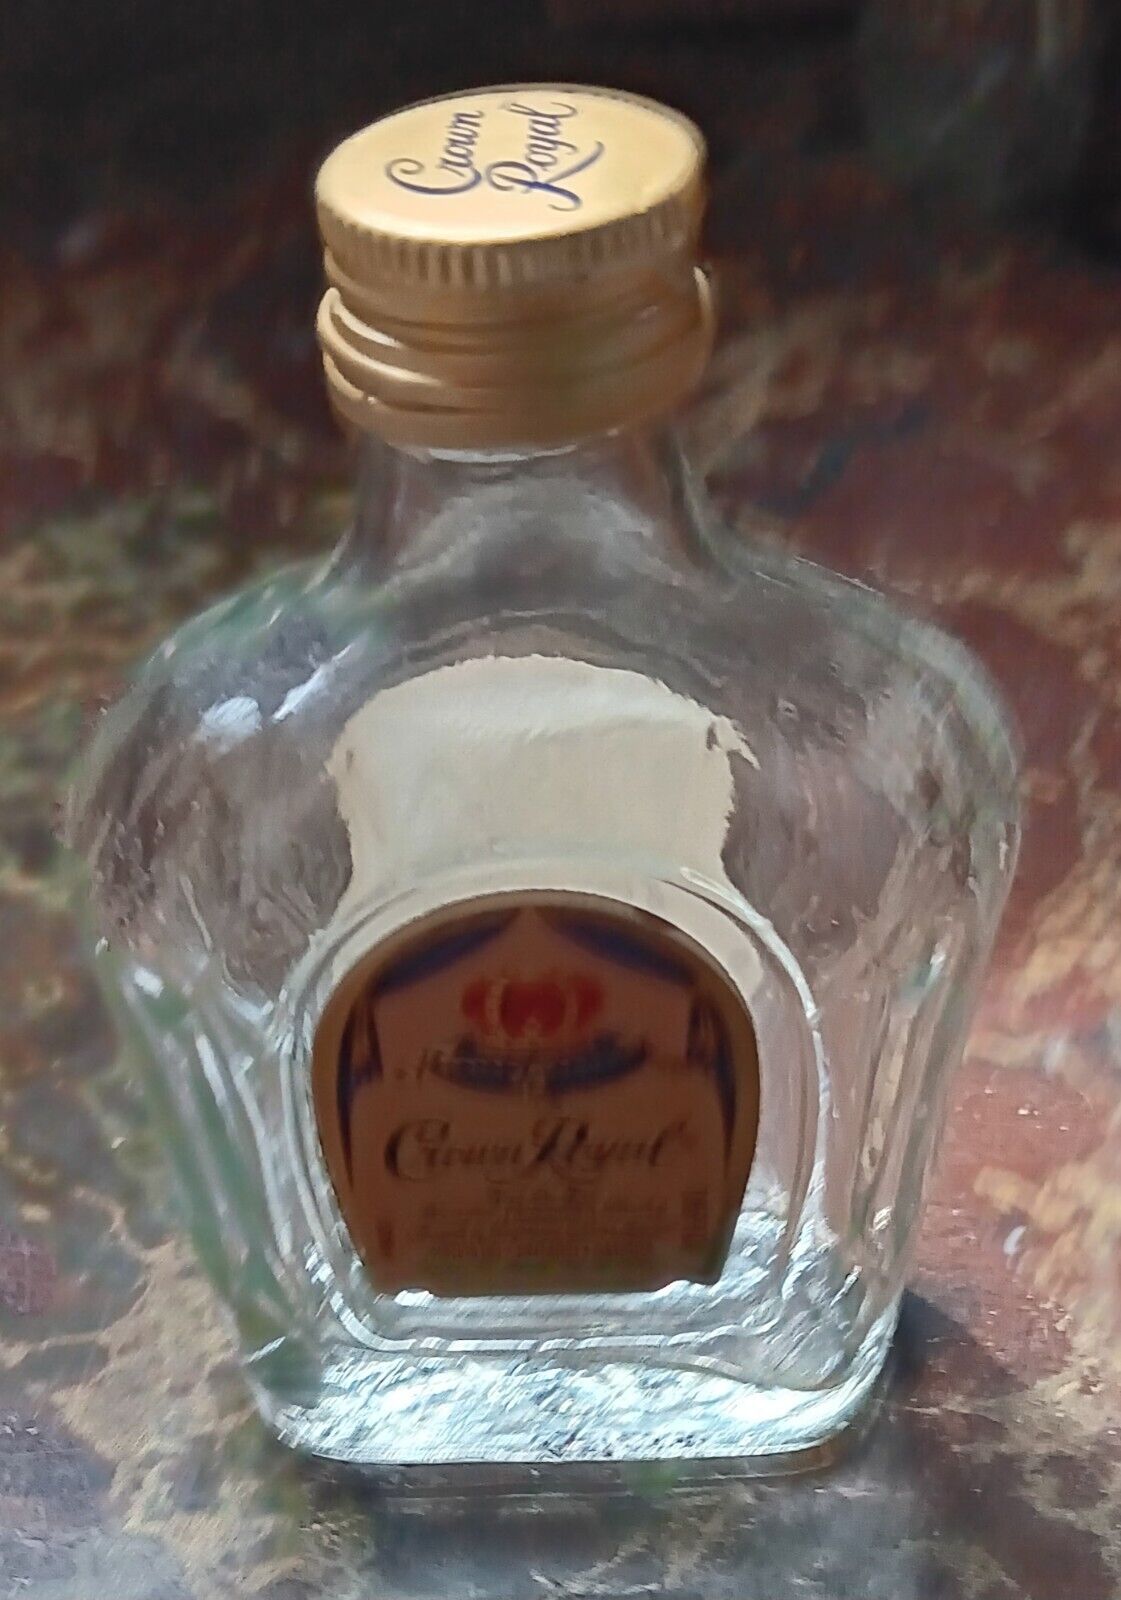 Crown Royal Canadian Whiskey bottle empty 50ml 